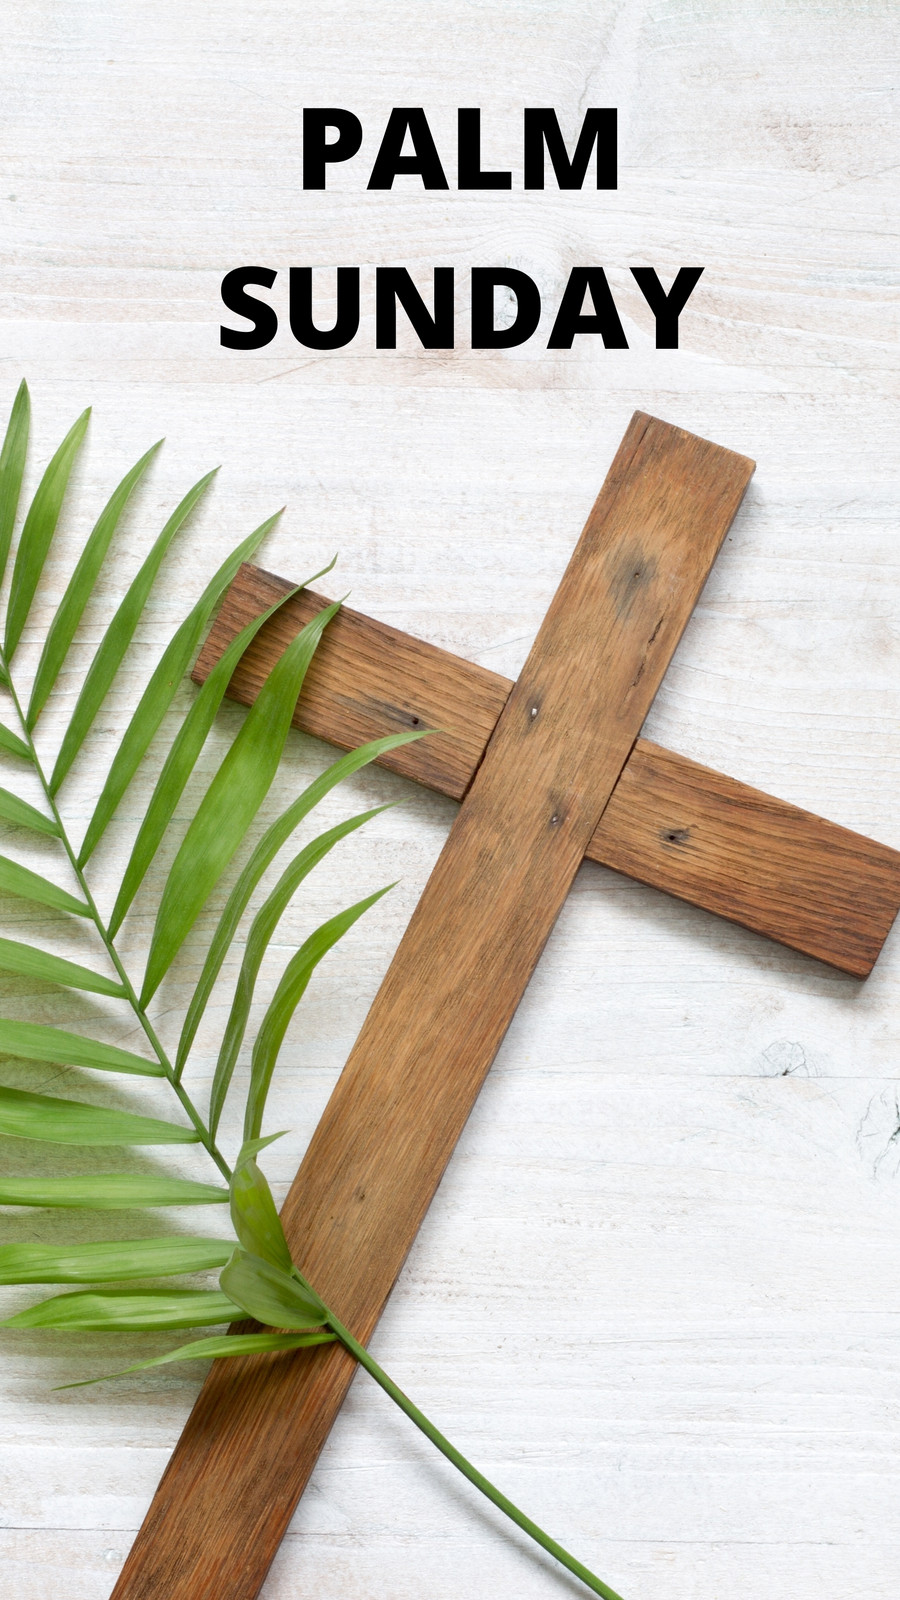 Page 2 - Free and customizable palm sunday templates